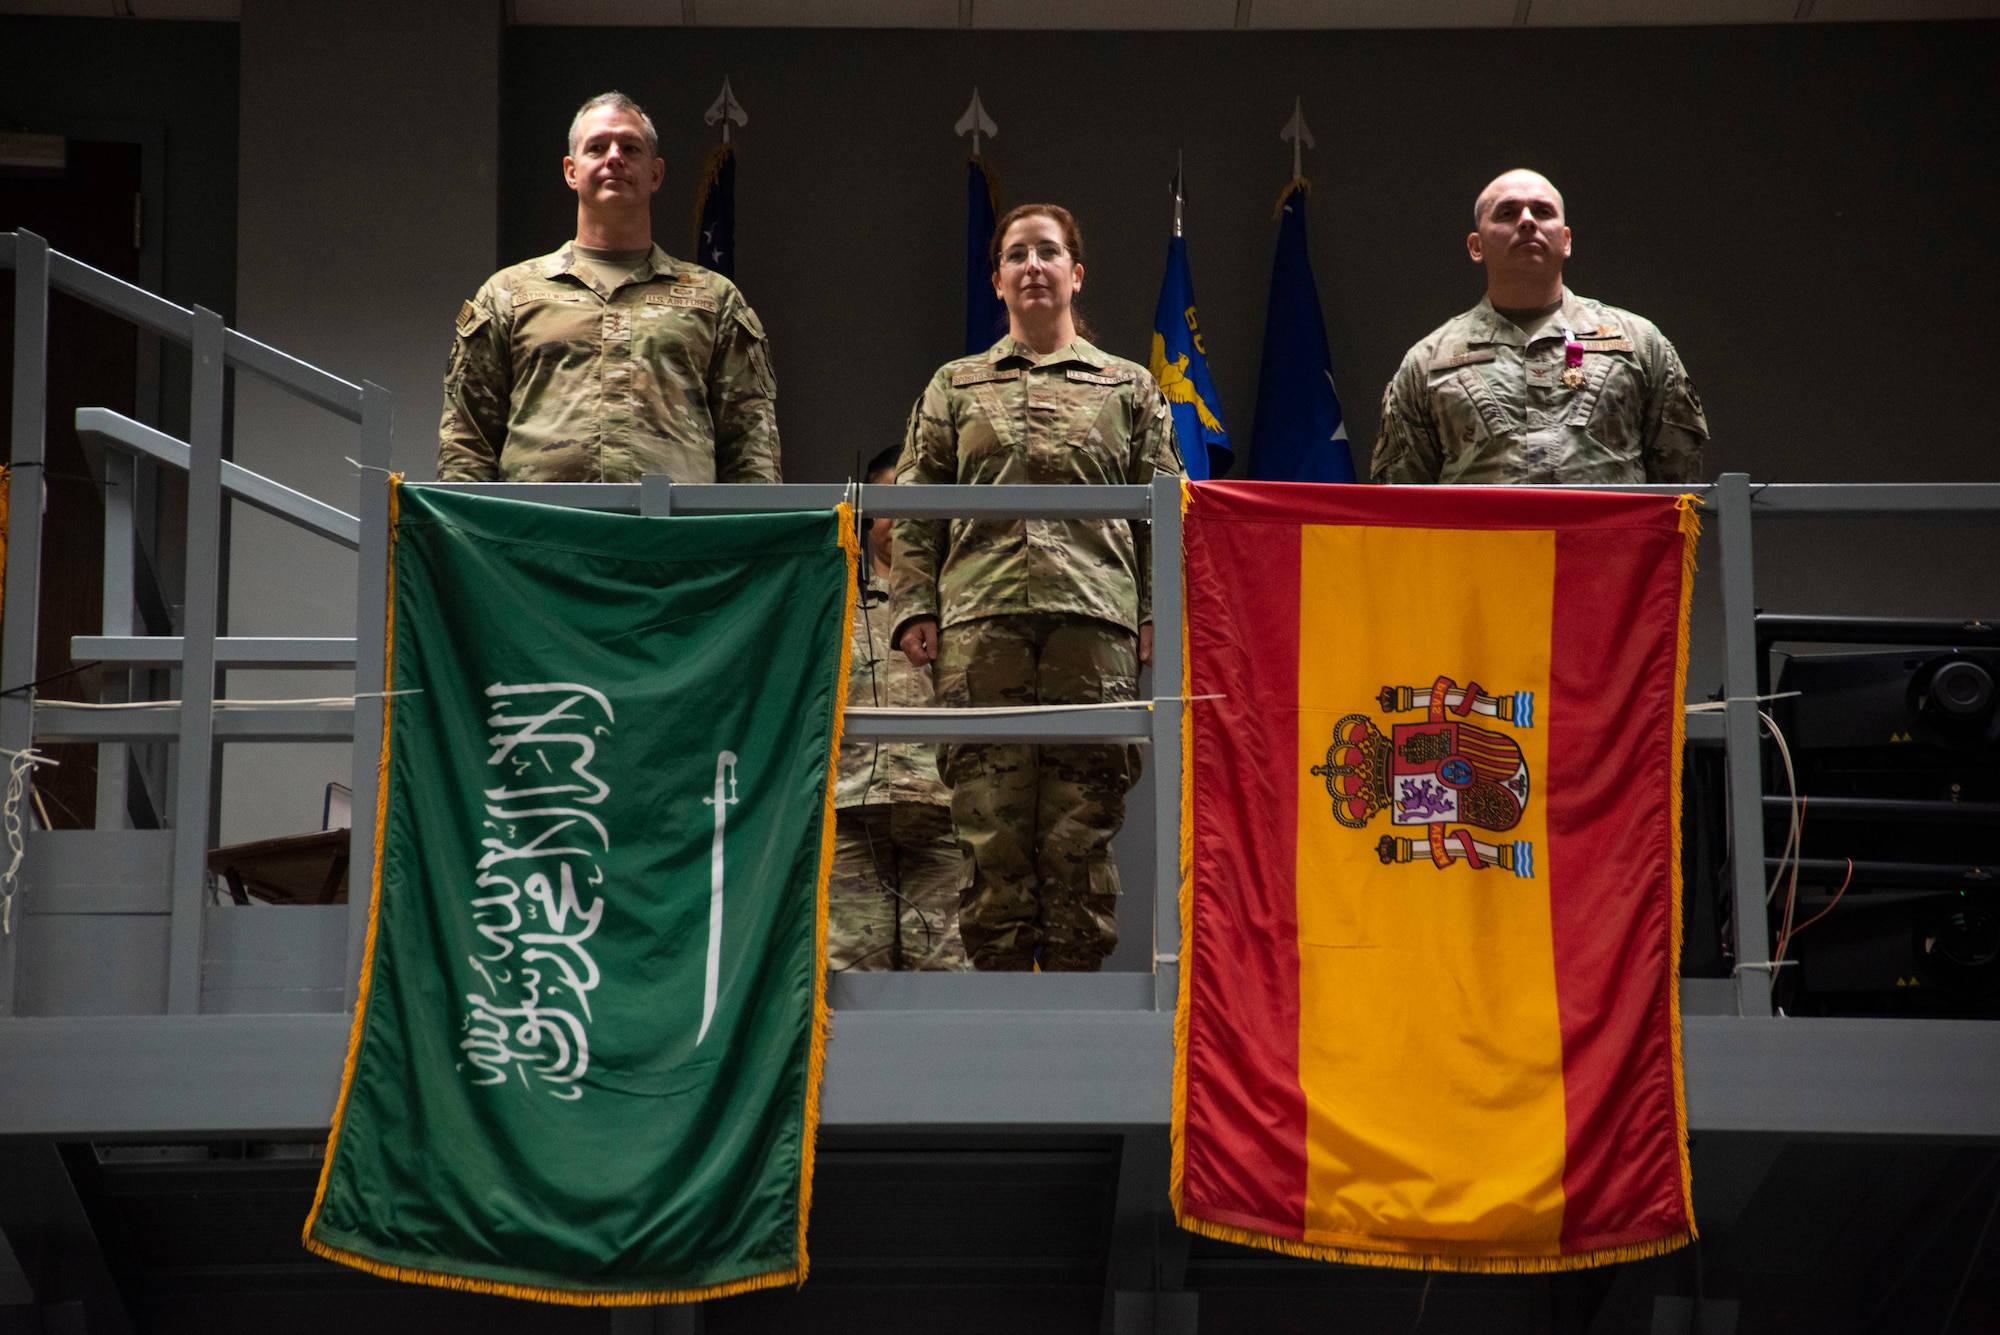 U.S. Air Force Lt. Gen. Alexus Grynkewich, Ninth Air Force (Air Forces Central) commander, and Combined Forces Air Component Commander for U.S. Central Command, left, Col. Julie Sposito-Salceies, center, and Col. Kevin Ogle, stand at attention during the 609th Air Operations Center change of command ceremony.